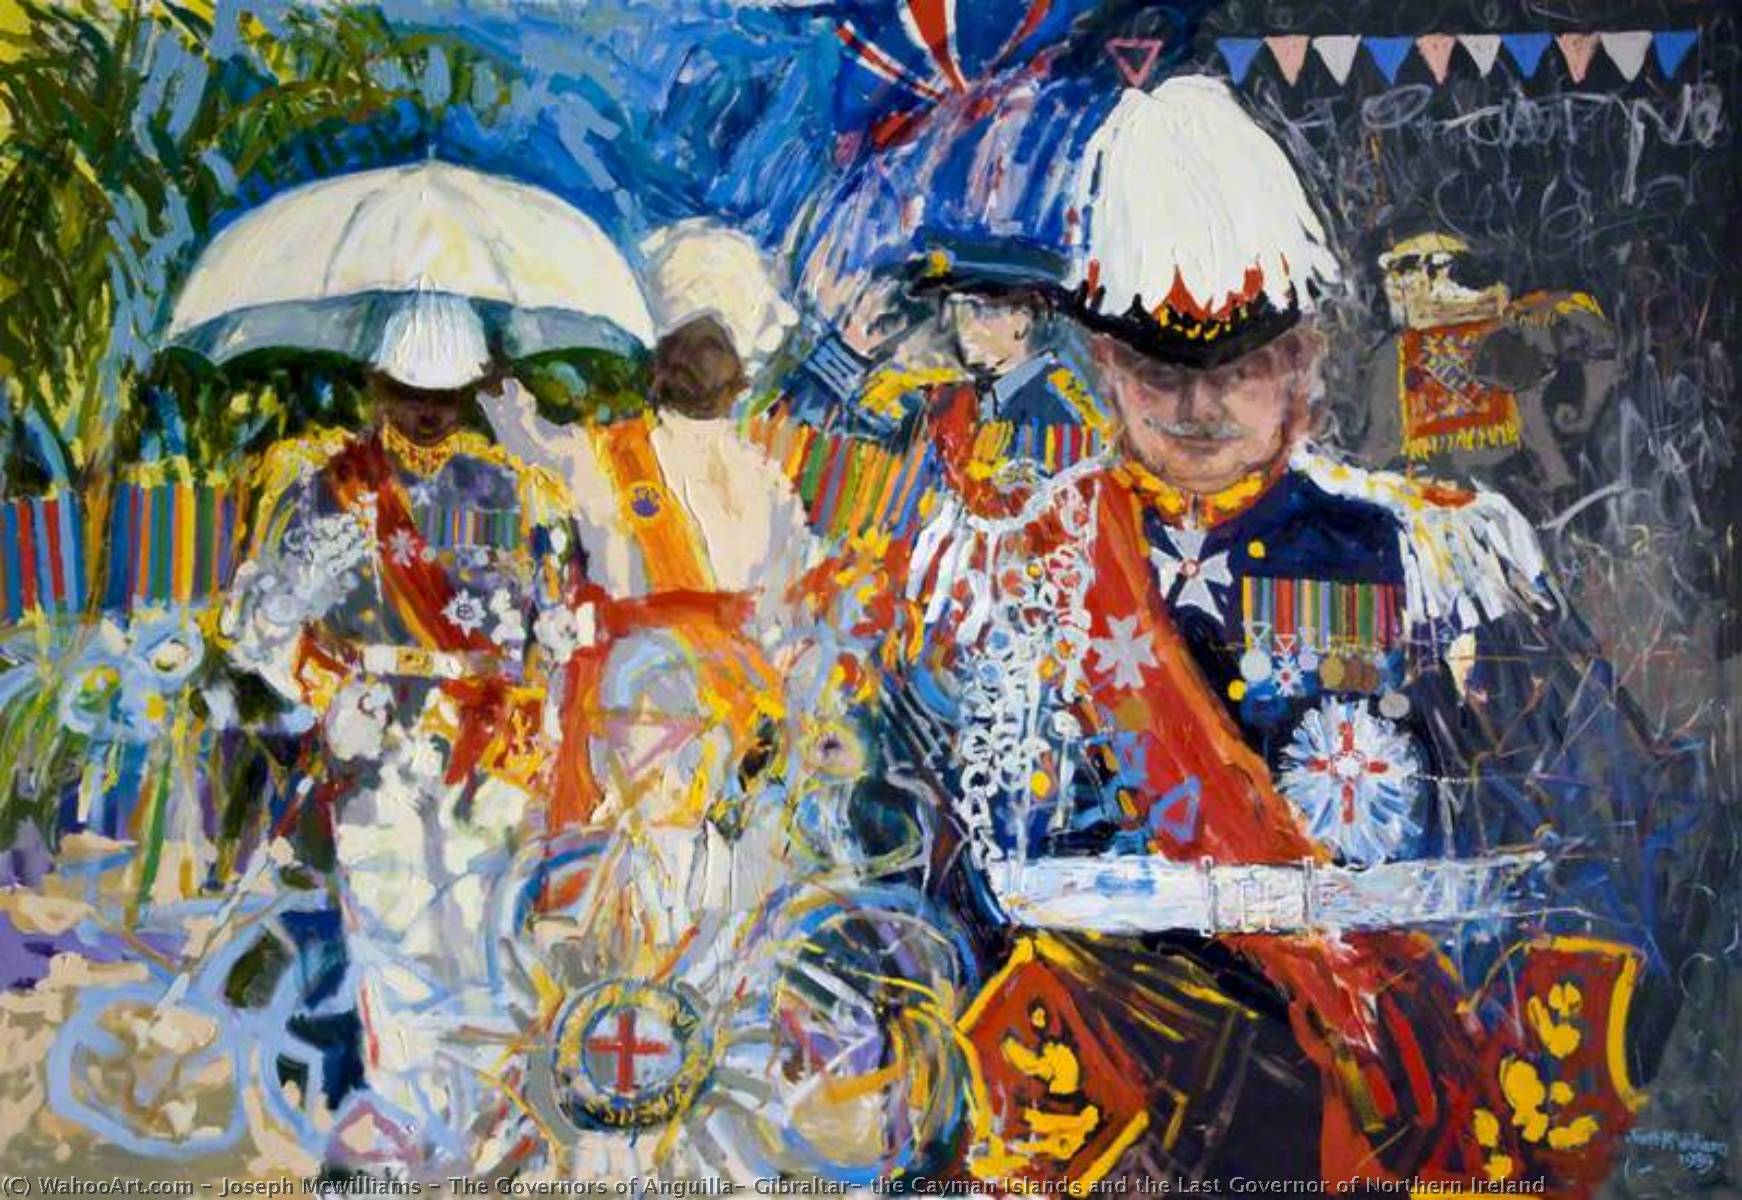 The Governors of Anguilla, Gibraltar, the Cayman Islands and the Last Governor of Northern Ireland, 1989 by Joseph Mcwilliams Joseph Mcwilliams | ArtsDot.com